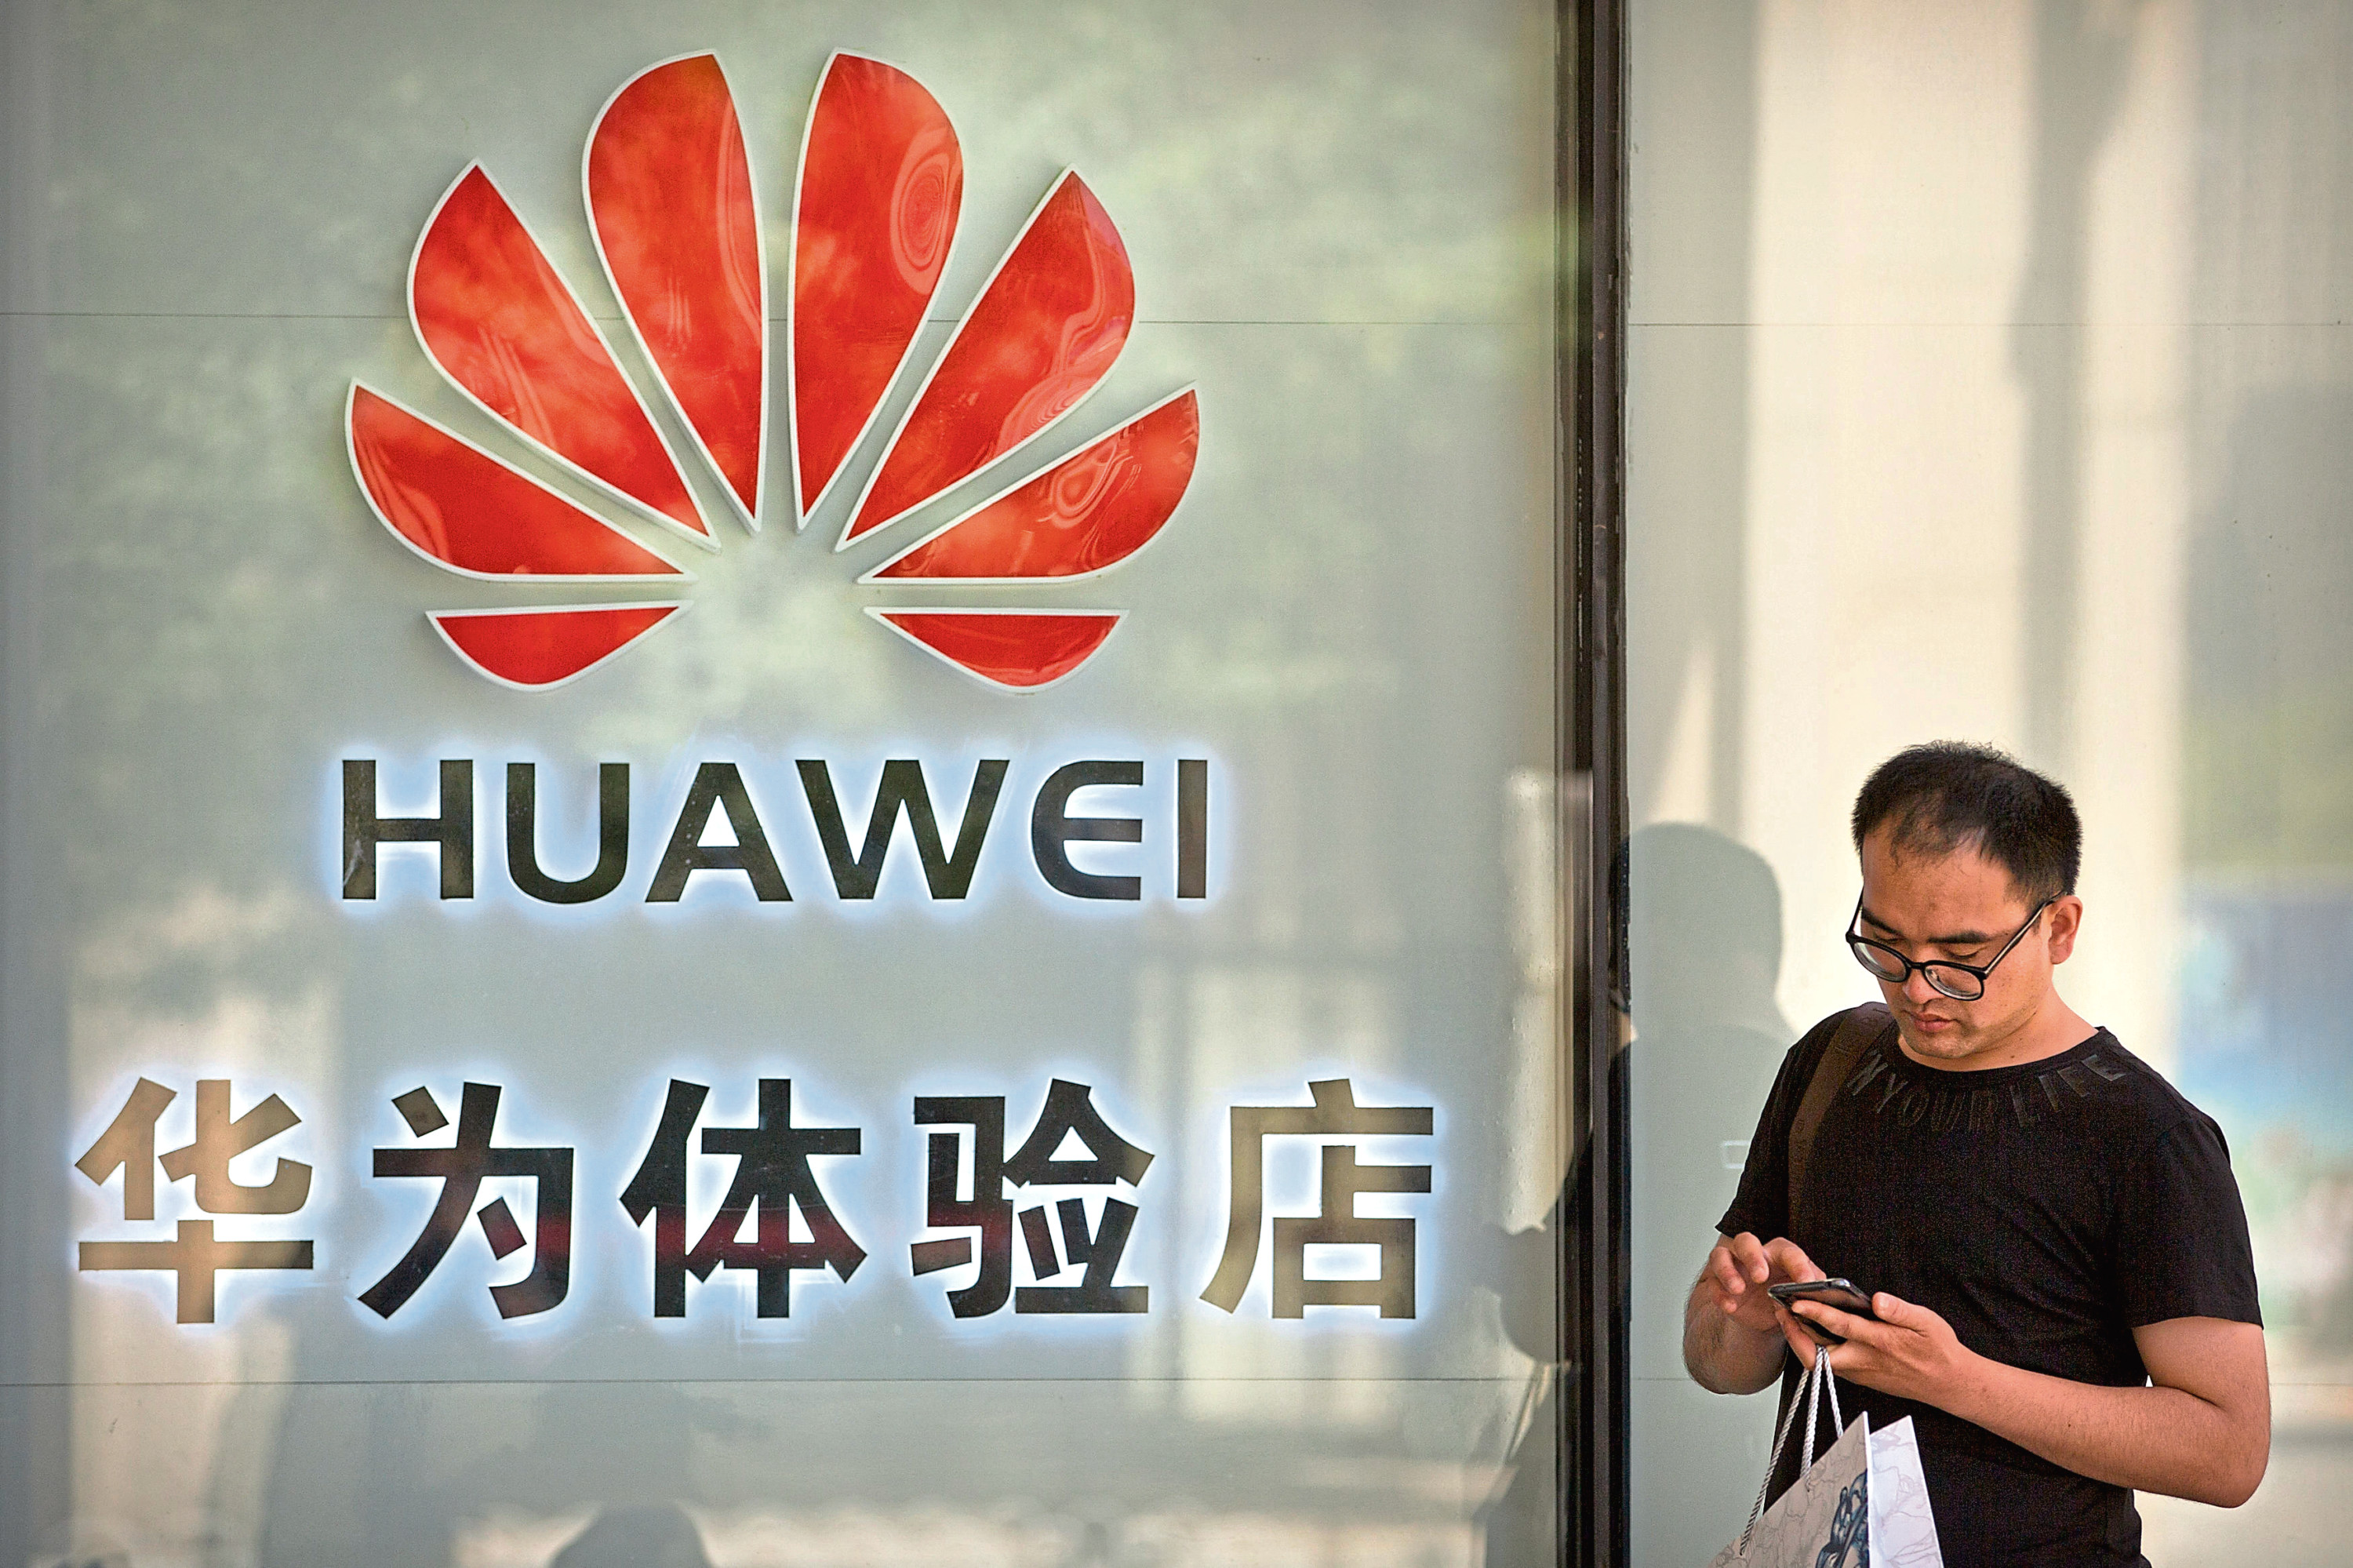 A man uses his smartphone outside of a shop selling Huawei products at a shopping mall in Beijing, Wednesday, May 29, 2019. Chinese tech giant Huawei filed a motion in U.S. court Wednesday challenging the constitutionality of a law that limits its sales of telecom equipment, the latest action in an ongoing clash with the U.S. government. (AP Photo/Mark Schiefelbein)